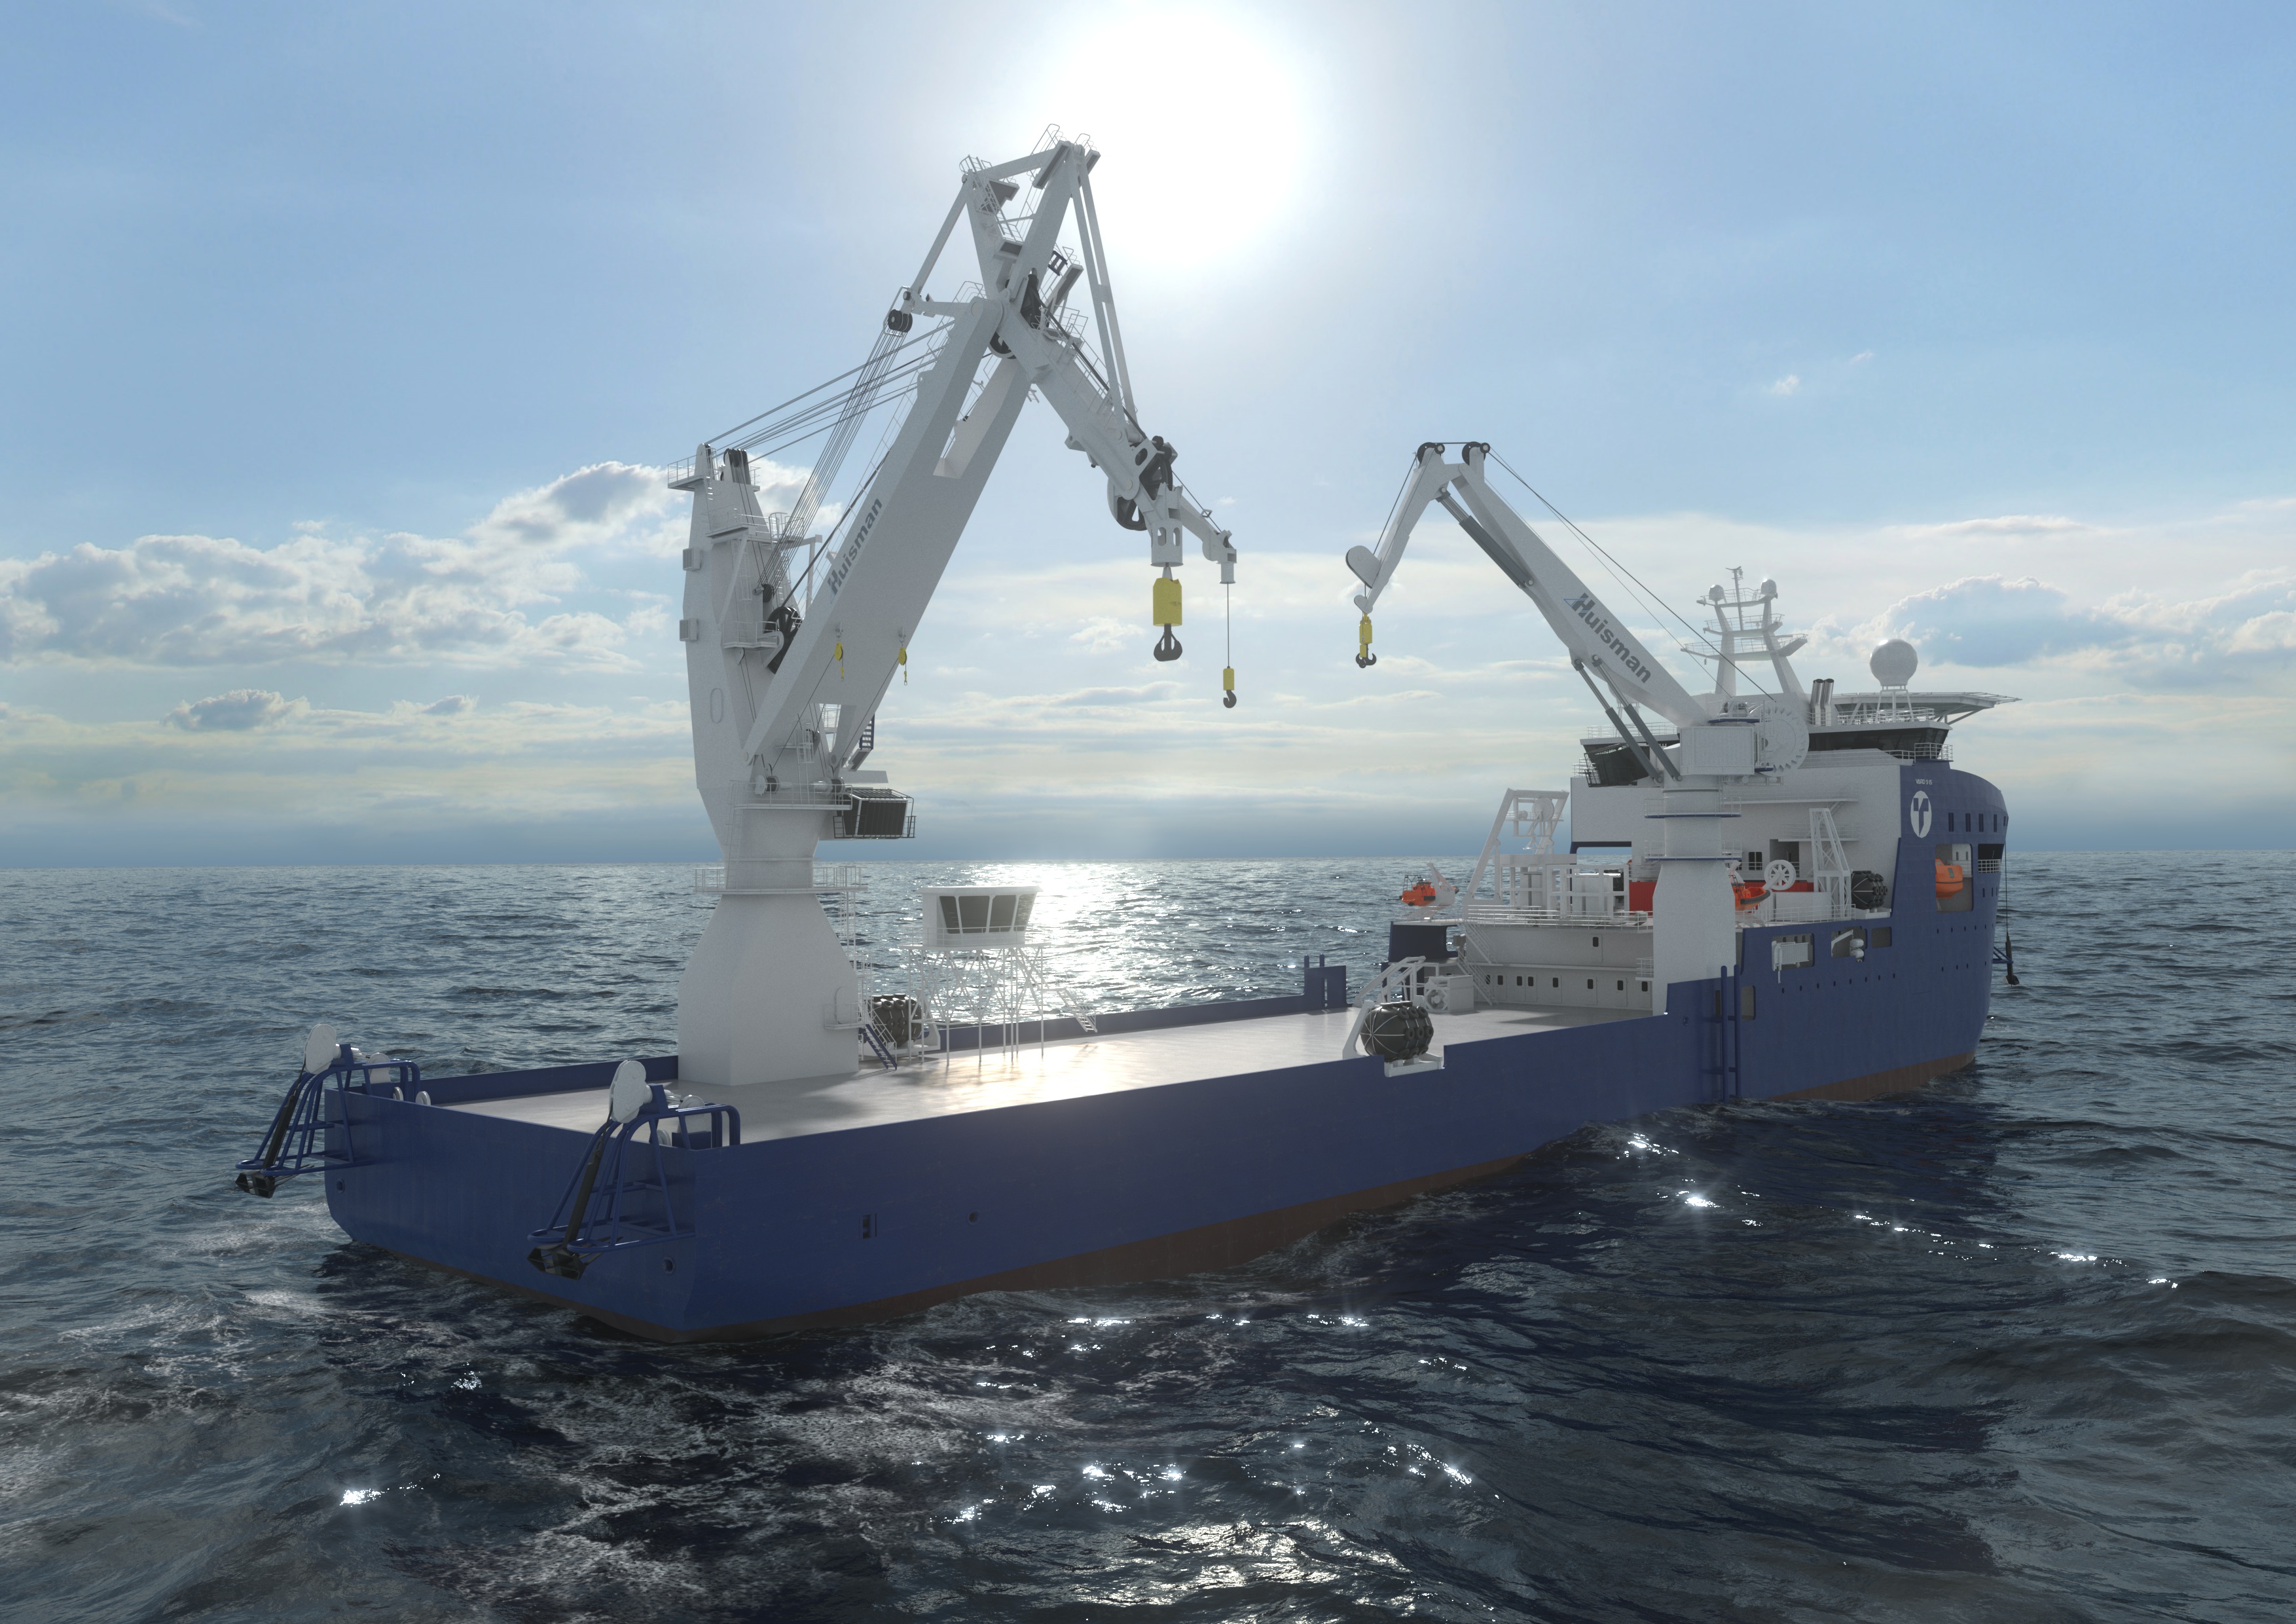 Japanese hybrid power cable lay & construction vessel to sport Huisman cranes